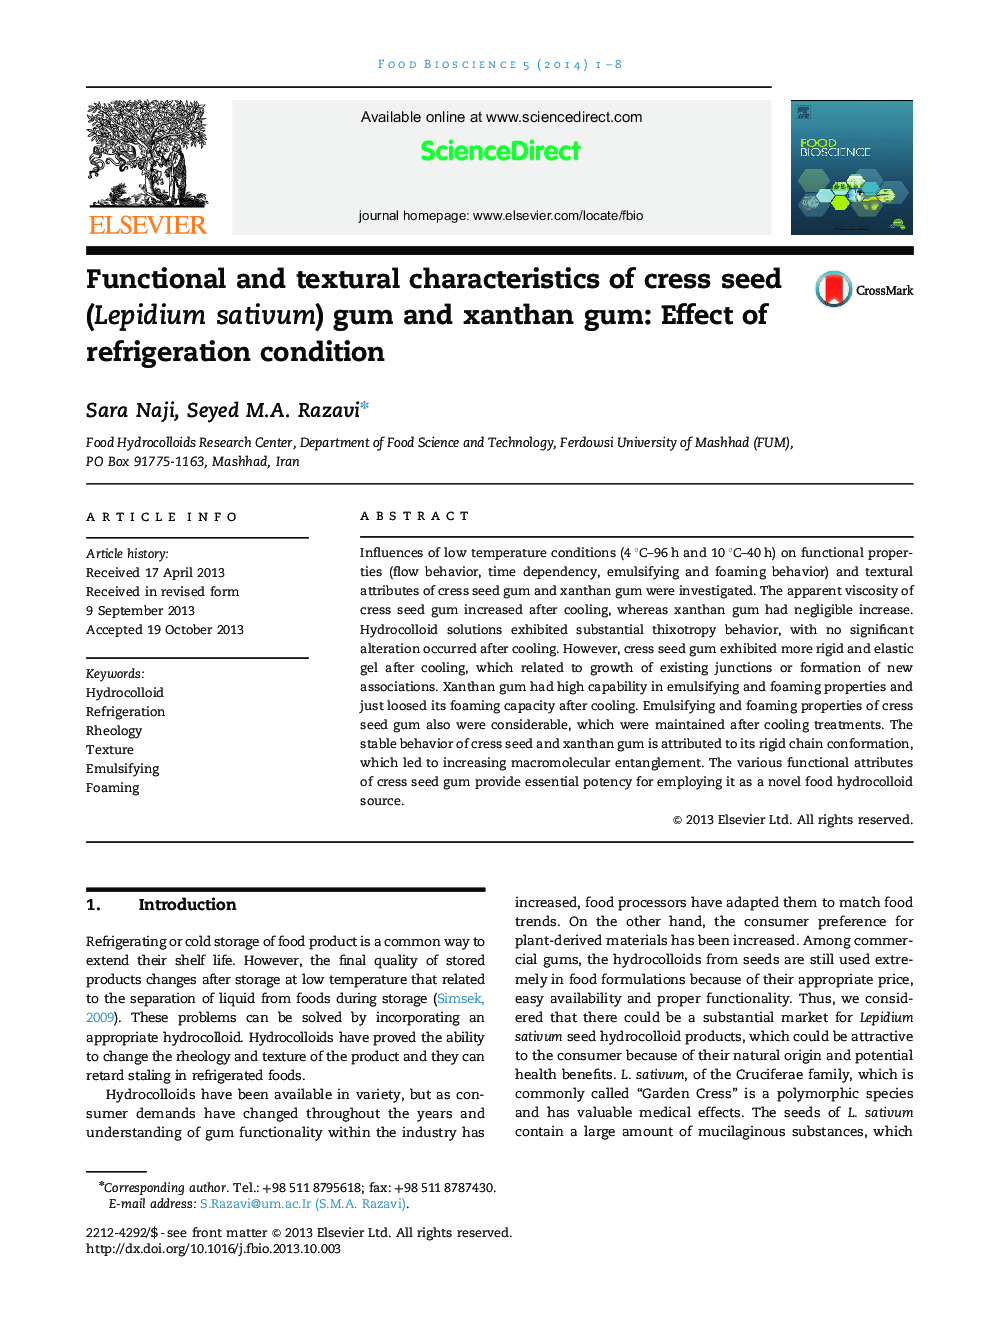 Functional and textural characteristics of cress seed (Lepidium sativum) gum and xanthan gum: Effect of refrigeration condition